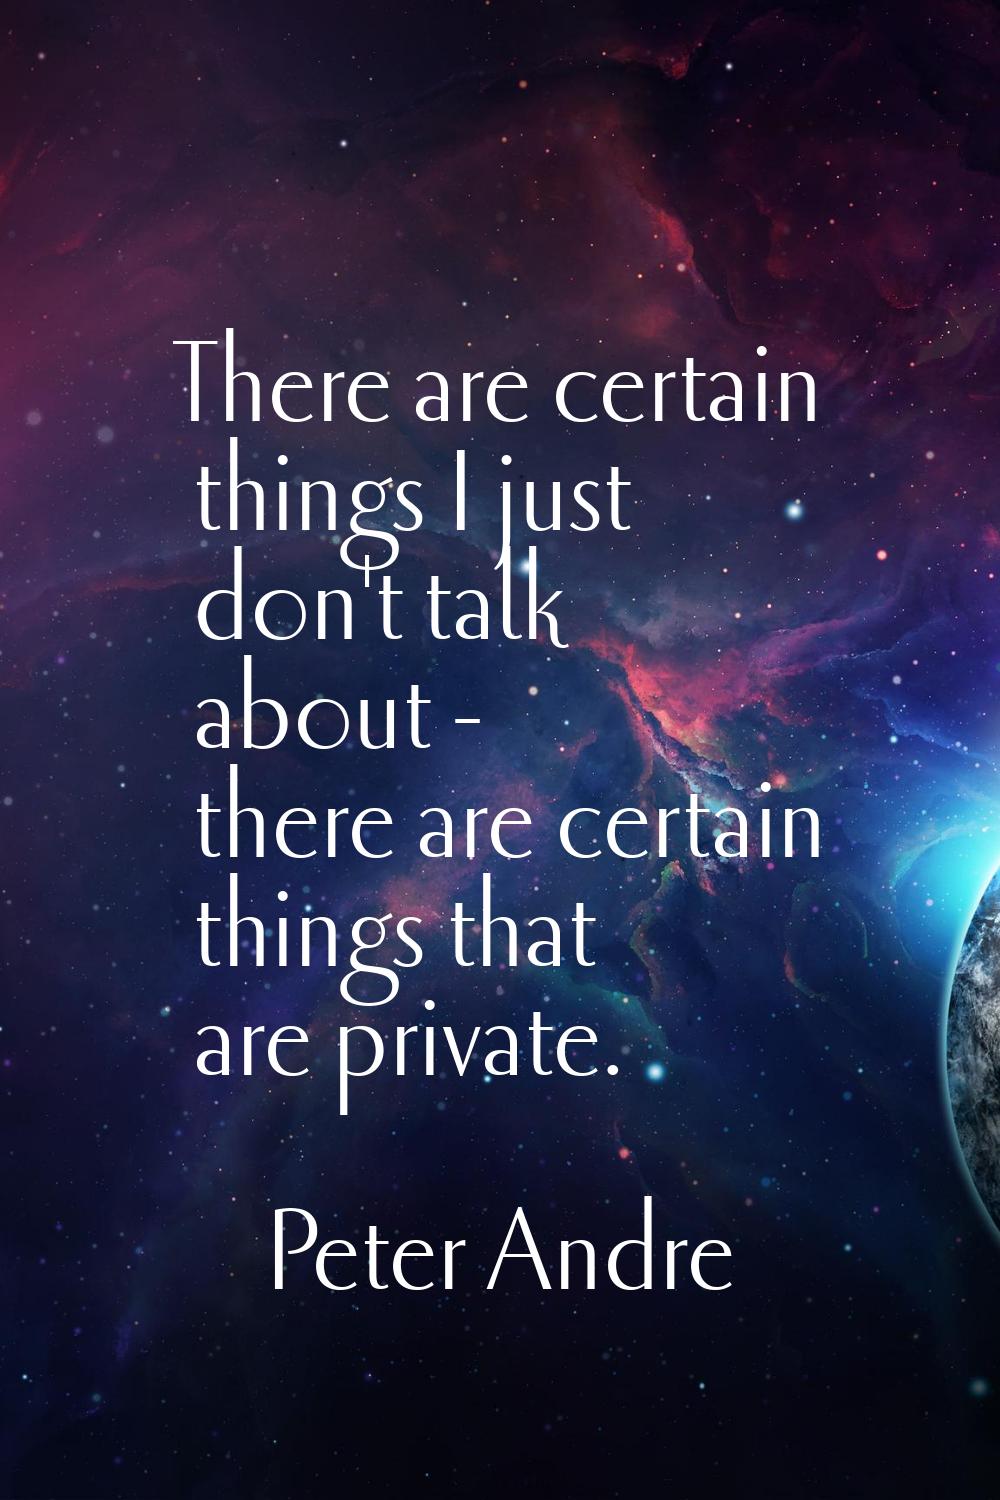 There are certain things I just don't talk about - there are certain things that are private.